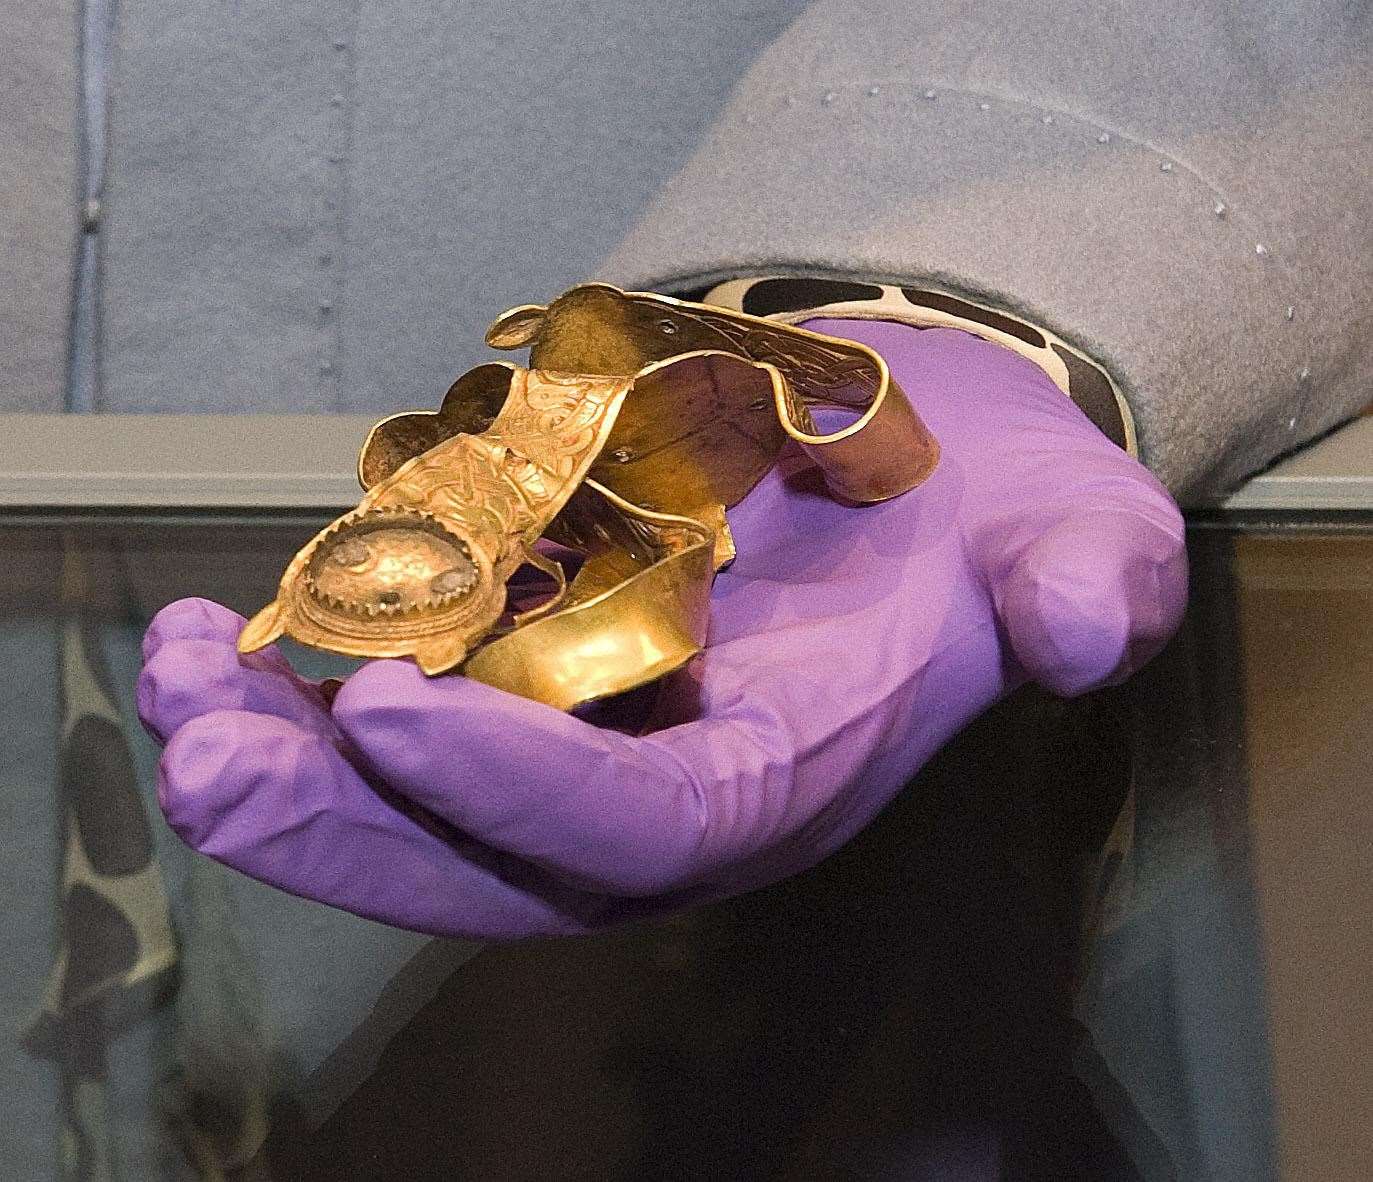 An exhibit from the Staffordshire Hoard Exhibition at the Potteries Museum and Art Gallery (Arthur Edwards/The Sun/PA)